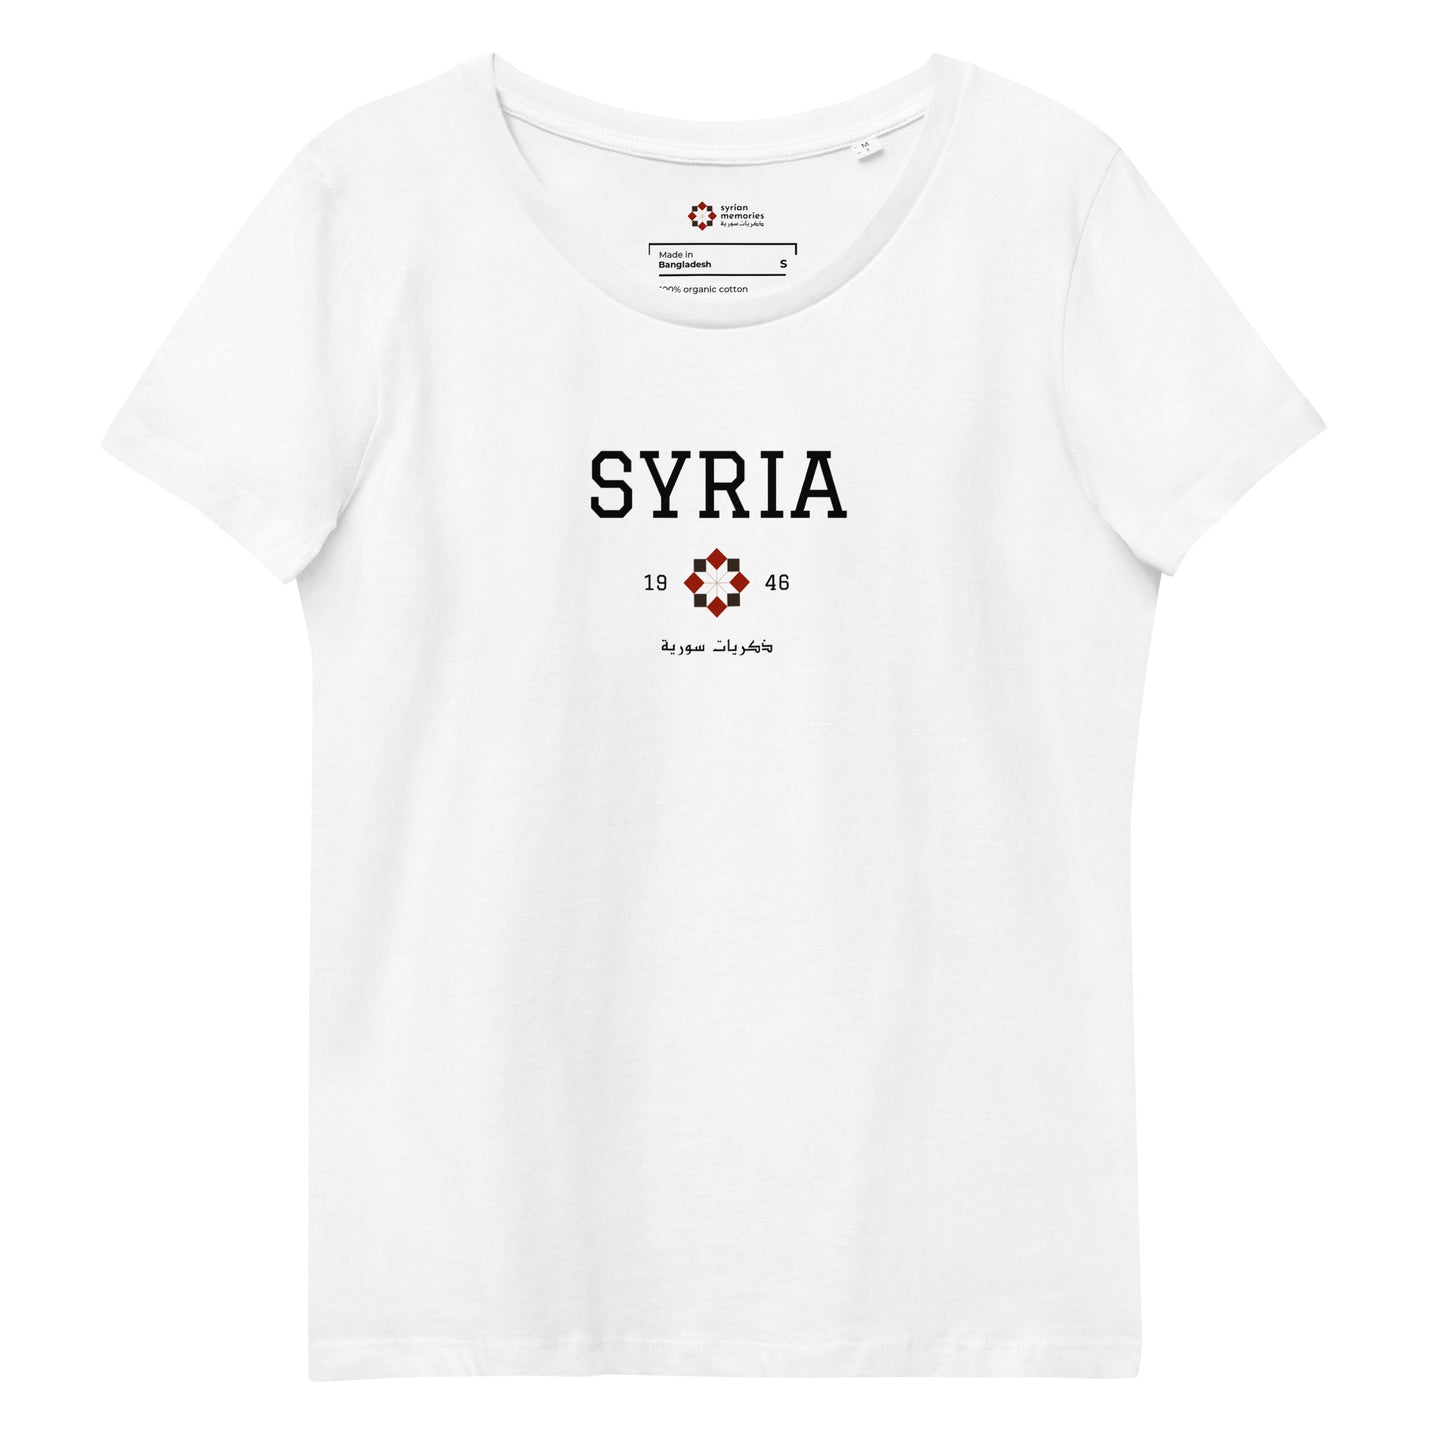 Syria - University Collection - Women's Fitted Eco Tee